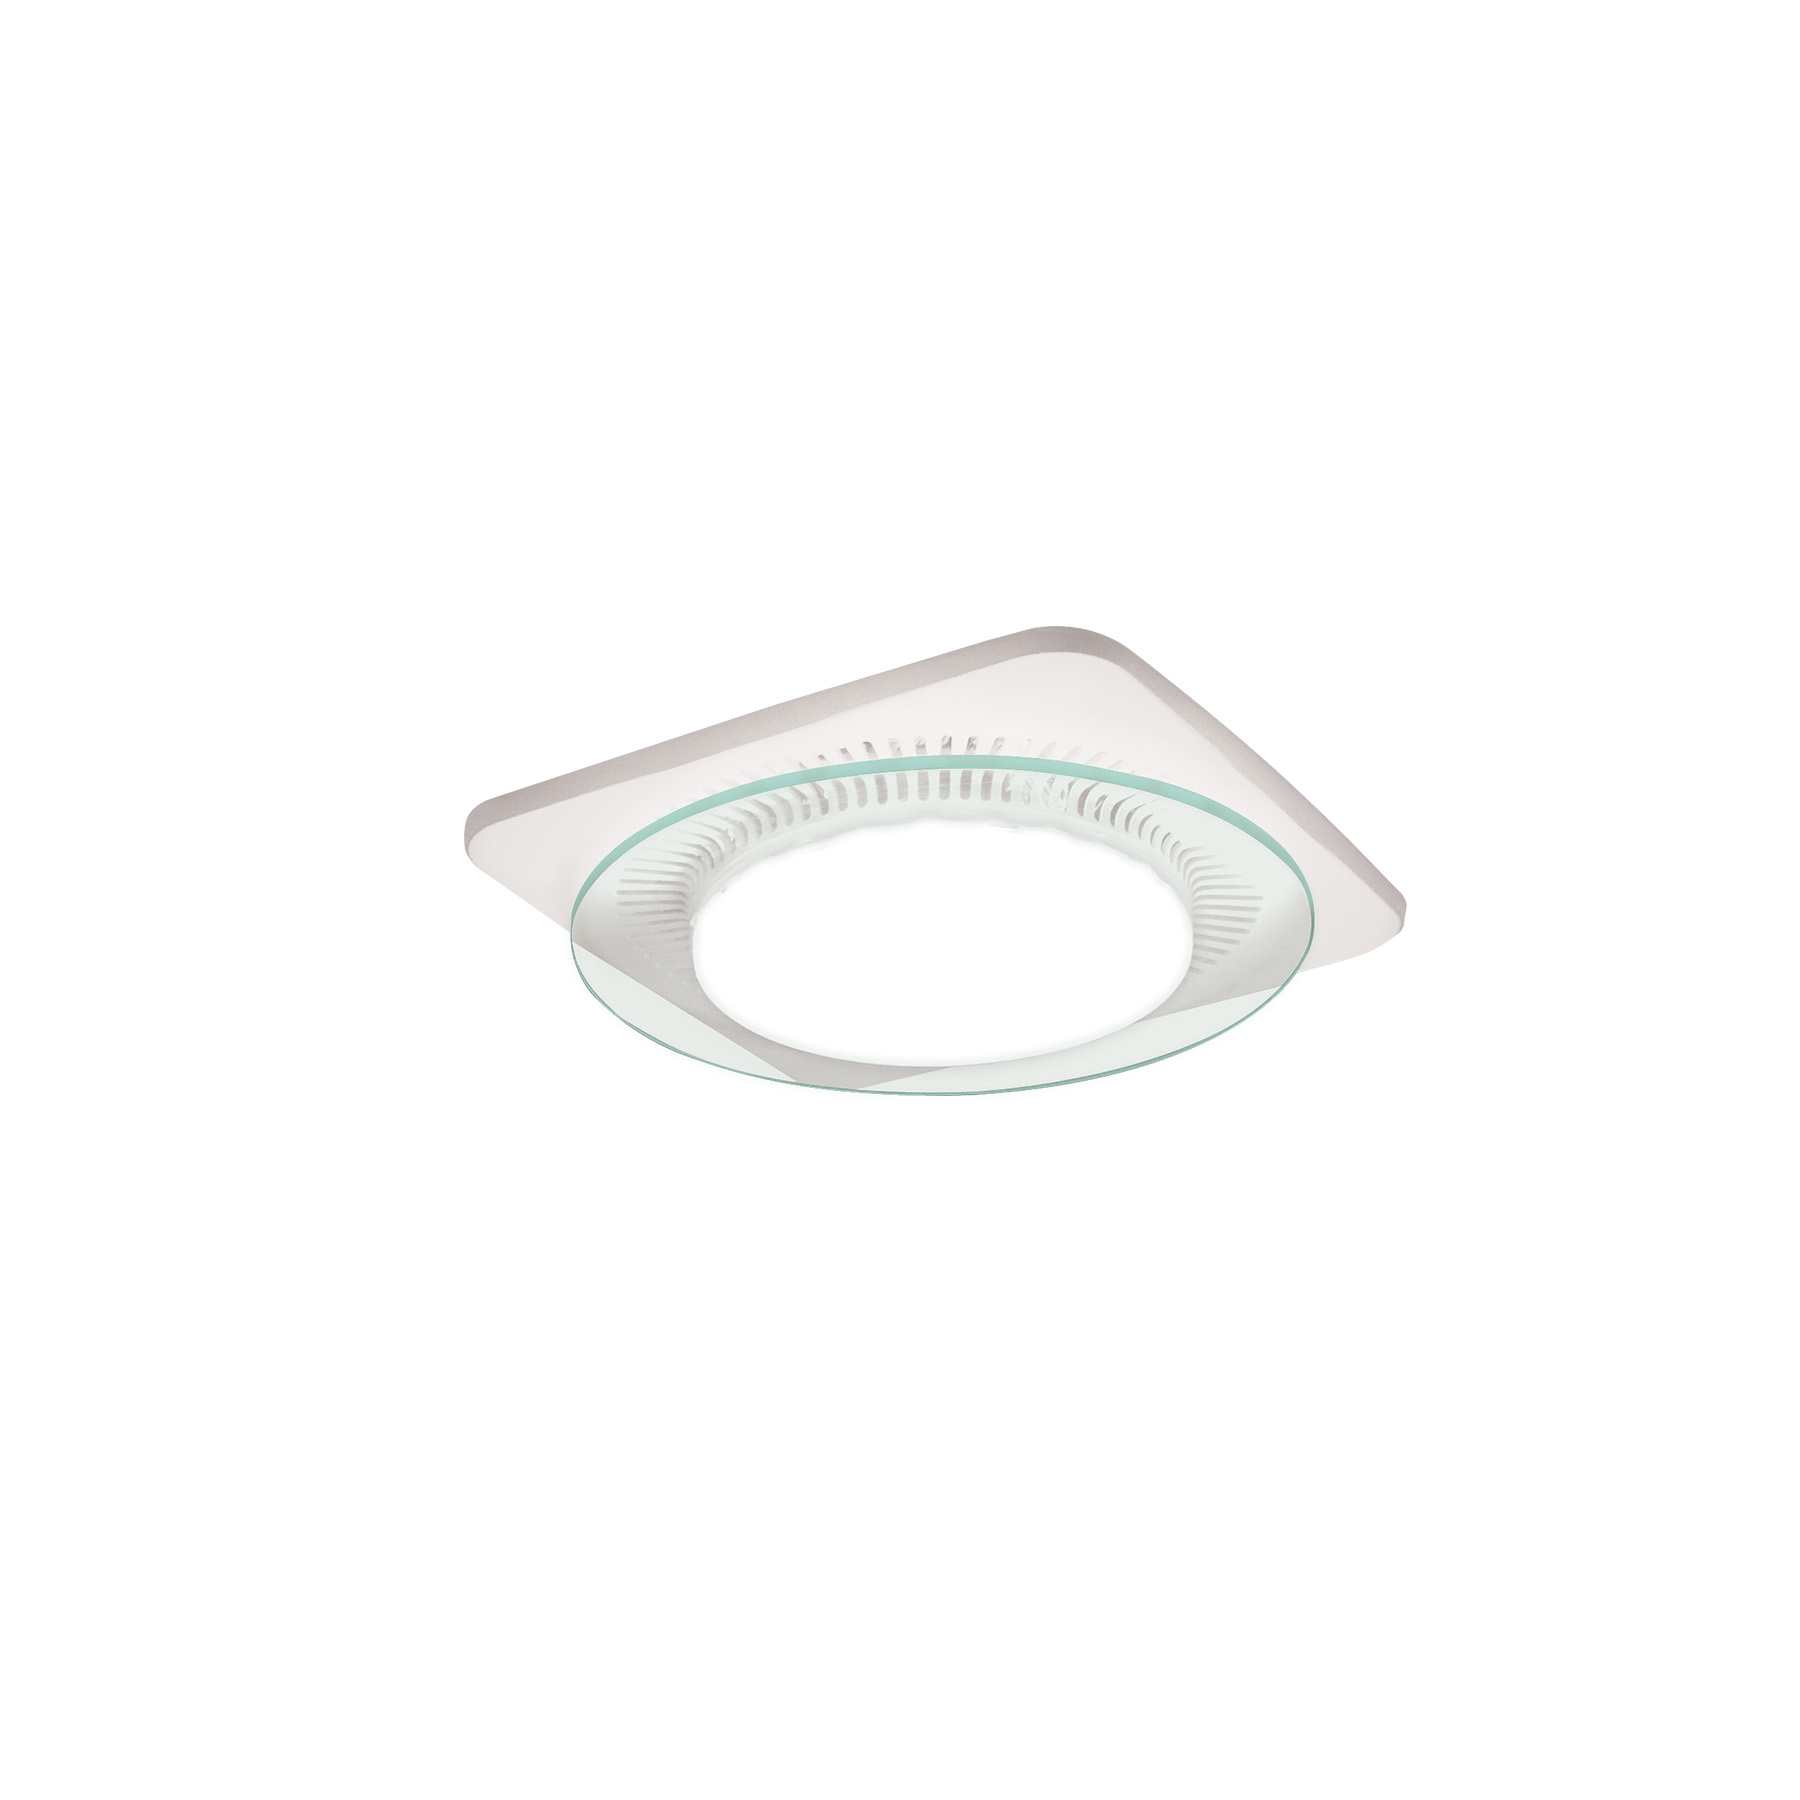 lunaura round panel decorative white 110 cfm bathroom exhaust fan with light and blue led night light energy star